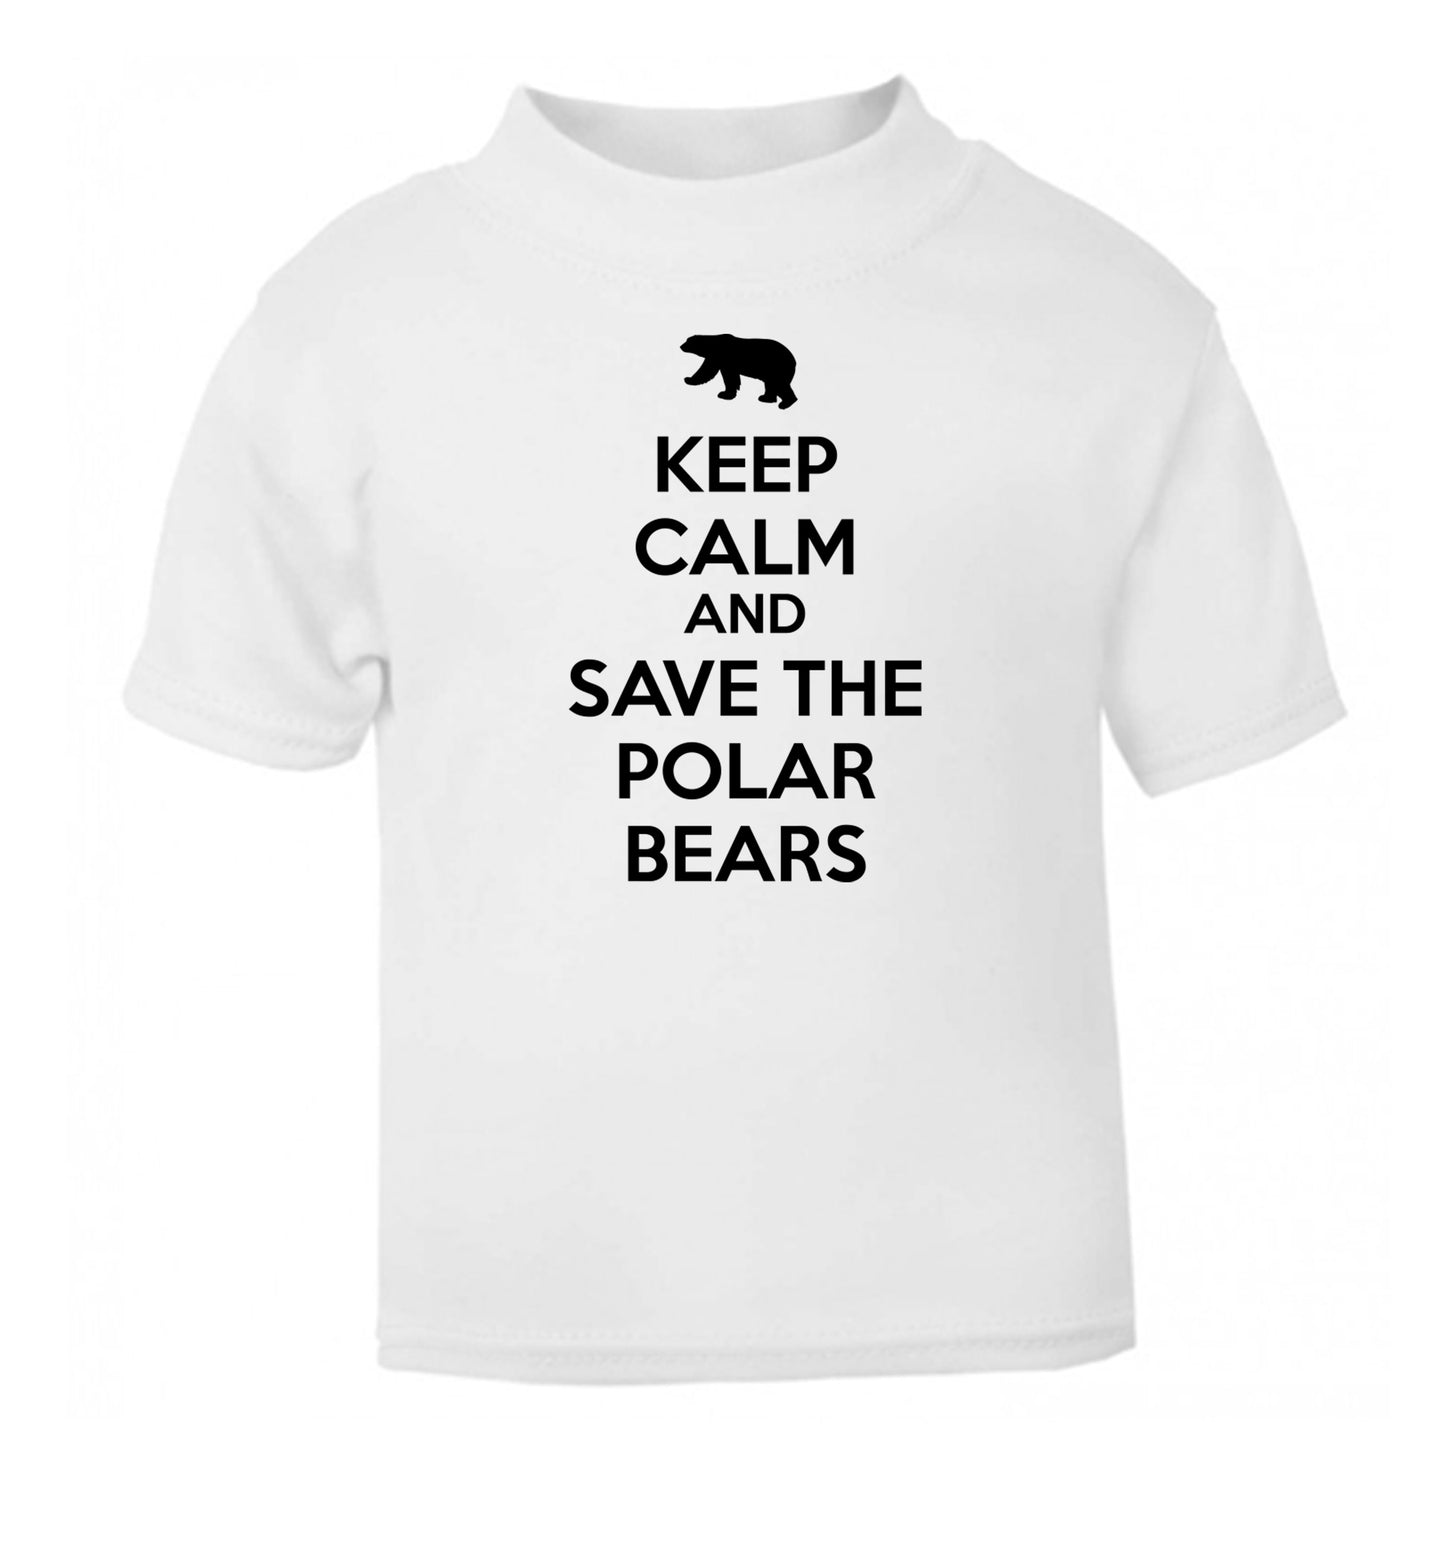 Keep calm and save the polar bears white Baby Toddler Tshirt 2 Years